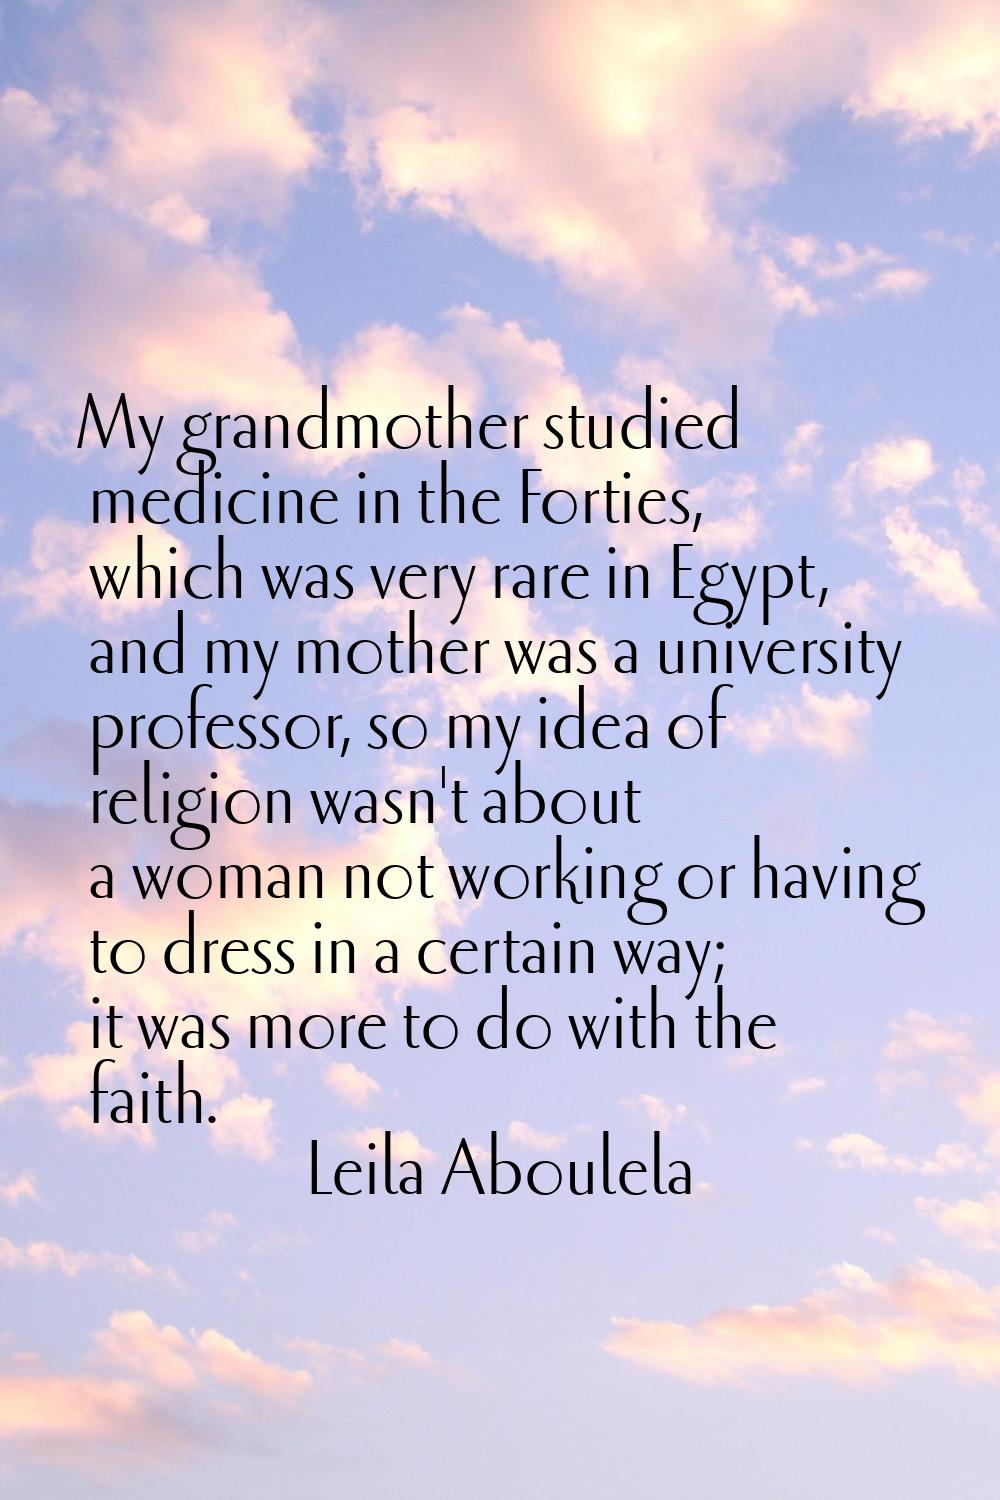 My grandmother studied medicine in the Forties, which was very rare in Egypt, and my mother was a u